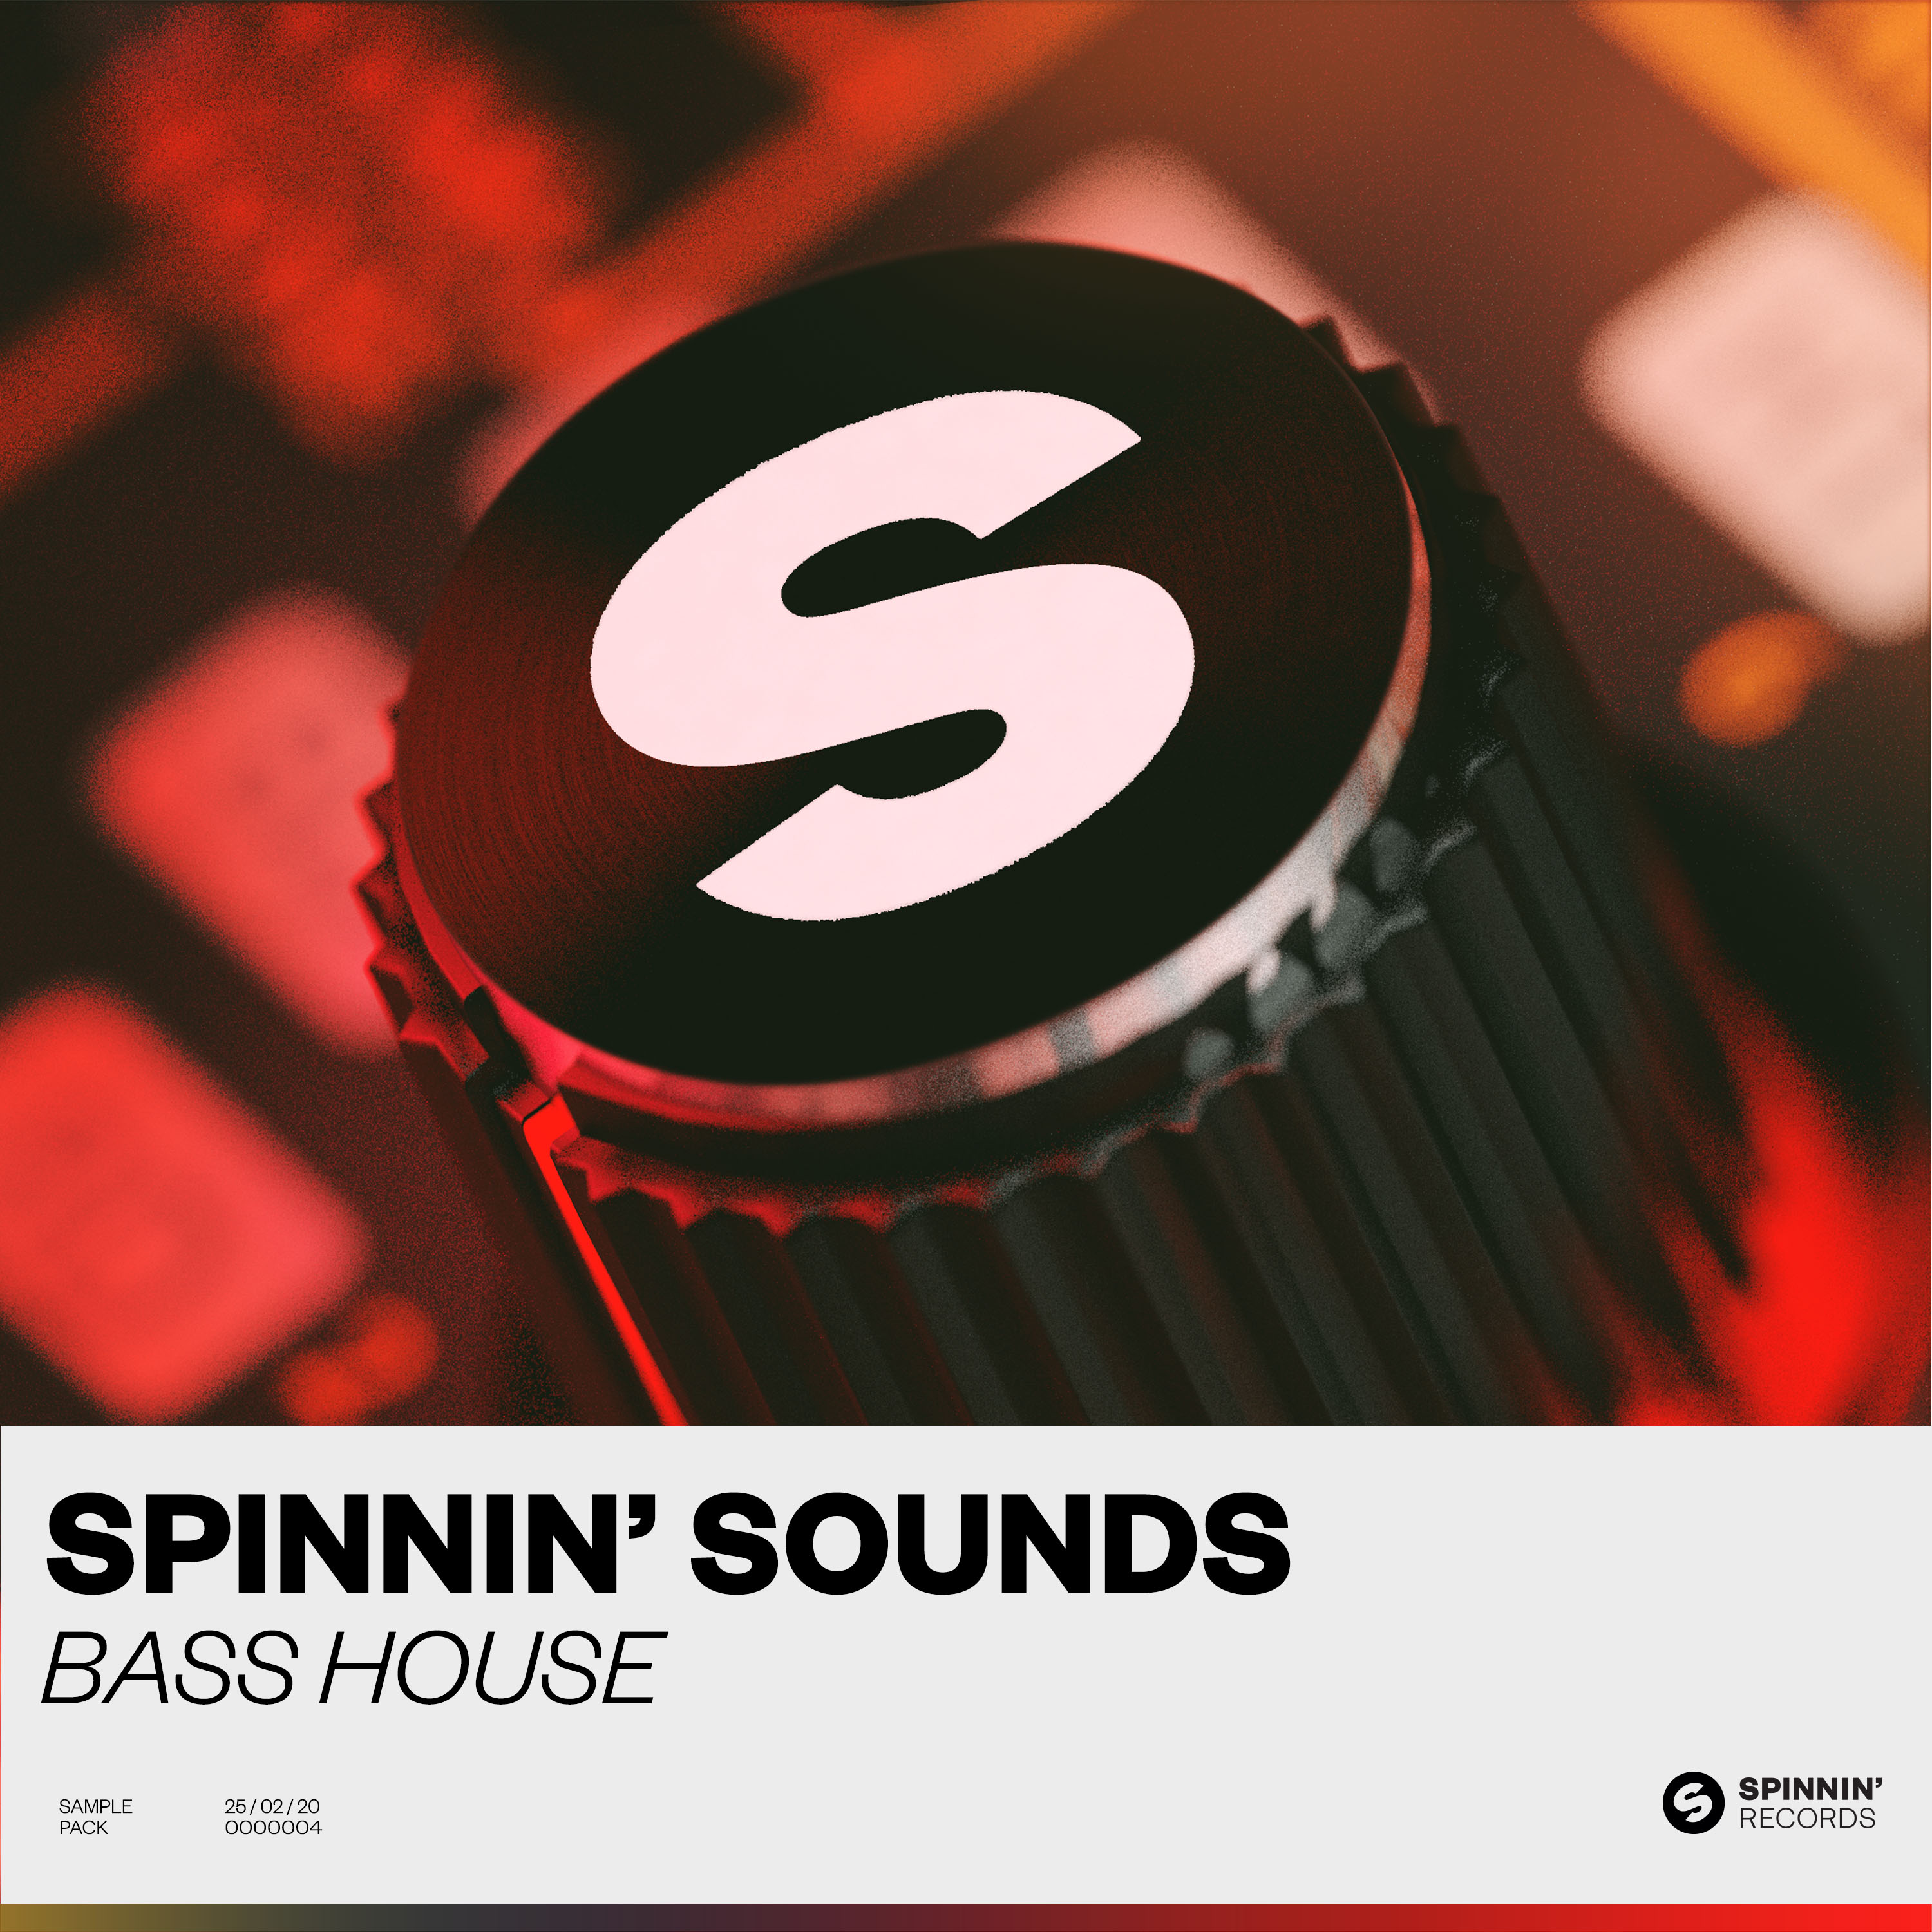 Spinnin' Records brings new sample pack: Bass House, News